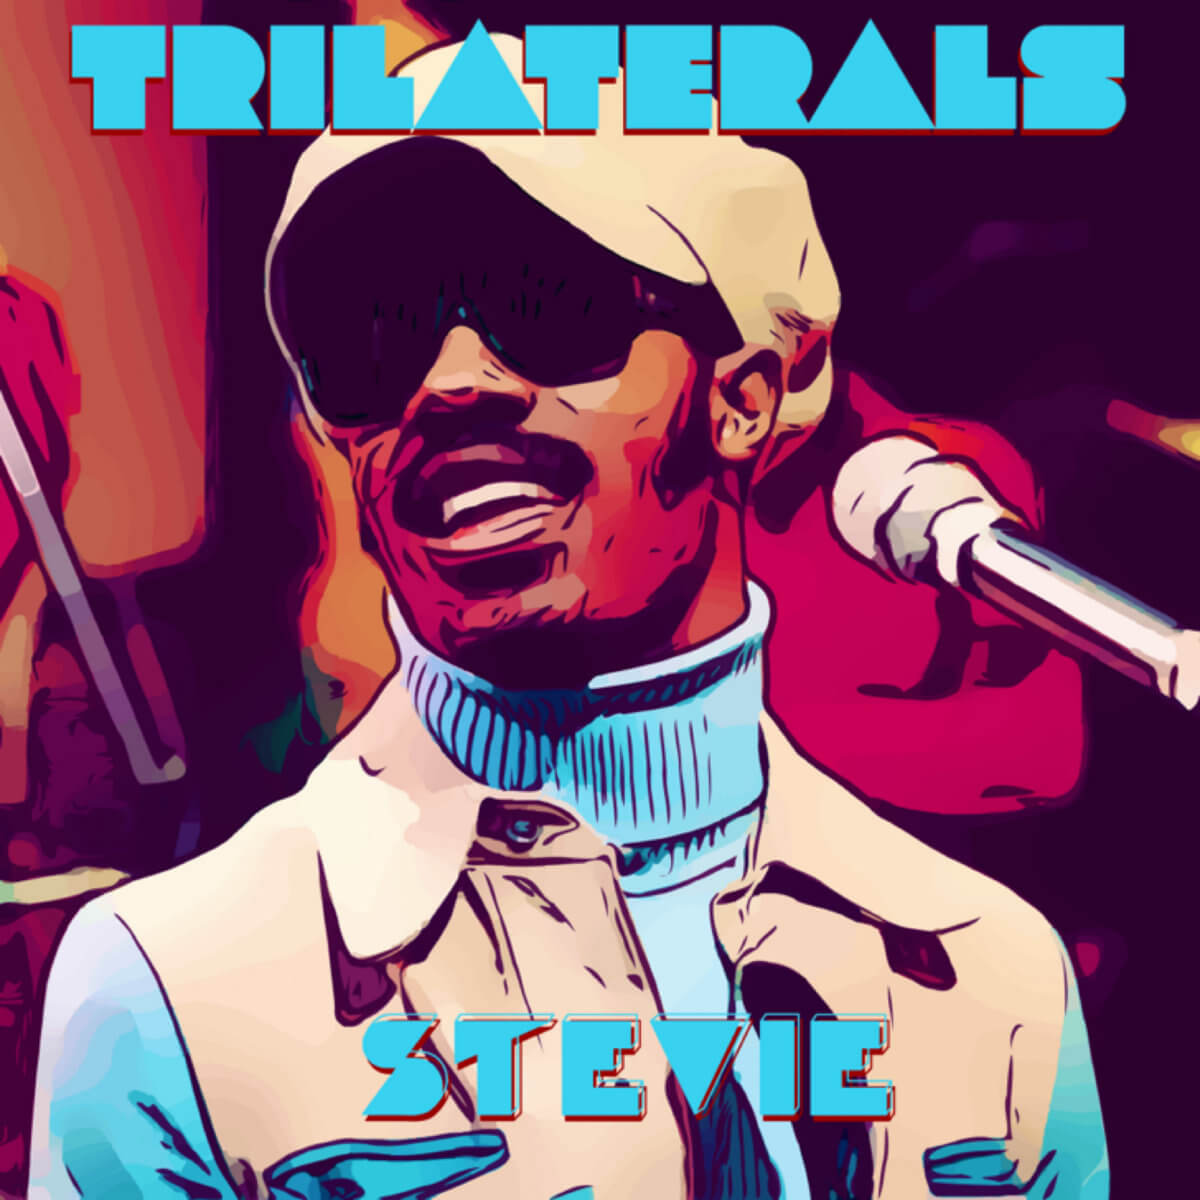 49fc50eb ed57 4d52 9aa1 1a0a649316f5 - new song by The Trilaterals